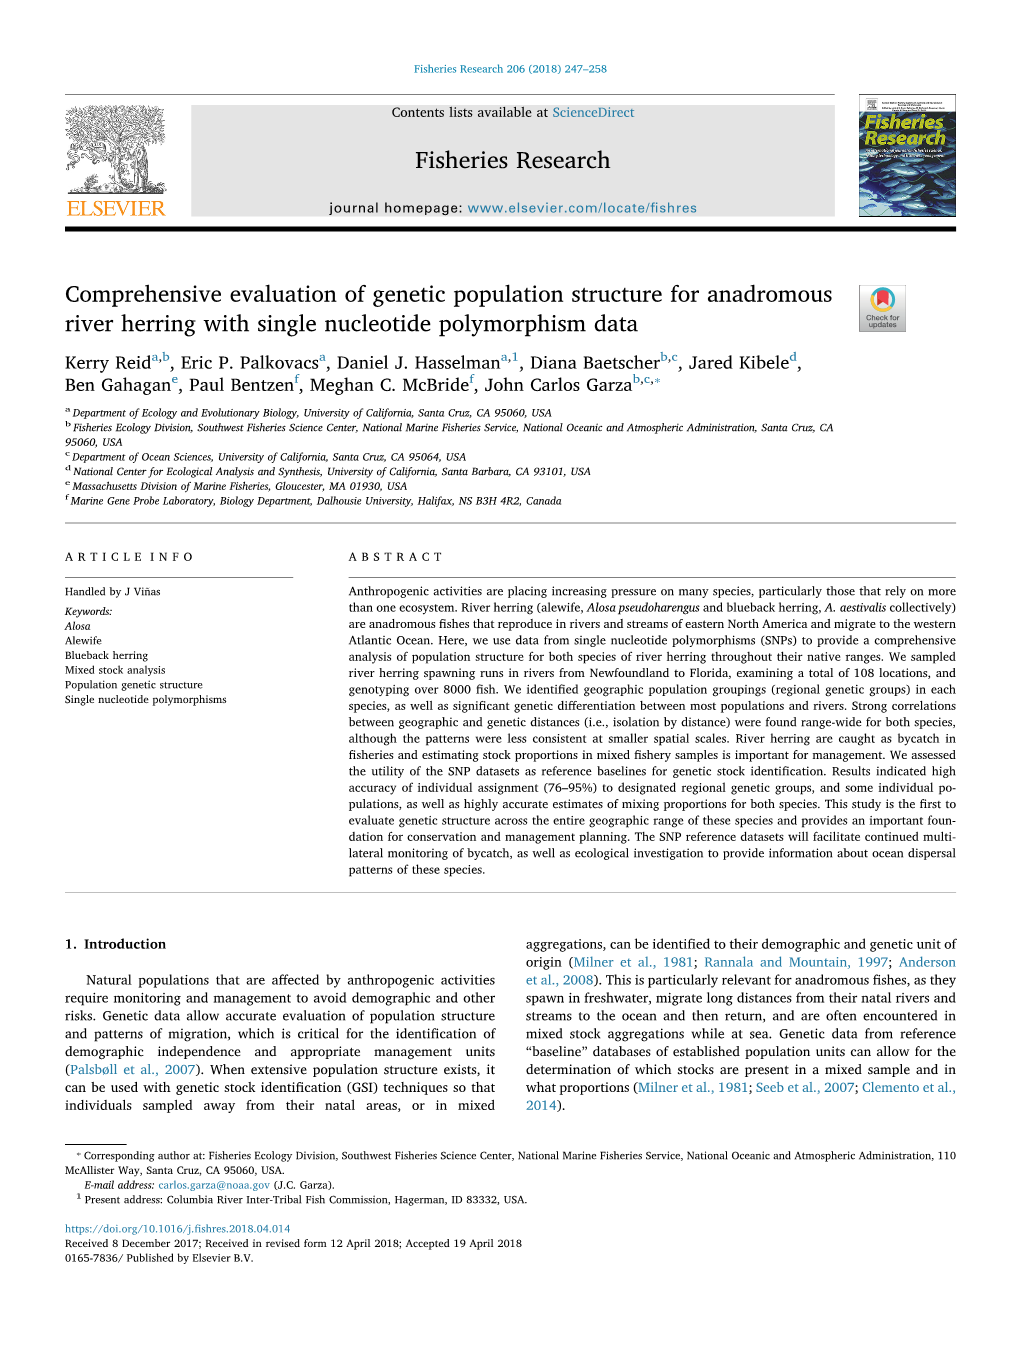 Comprehensive Evaluation of Genetic Population Structure for Anadromous T River Herring with Single Nucleotide Polymorphism Data